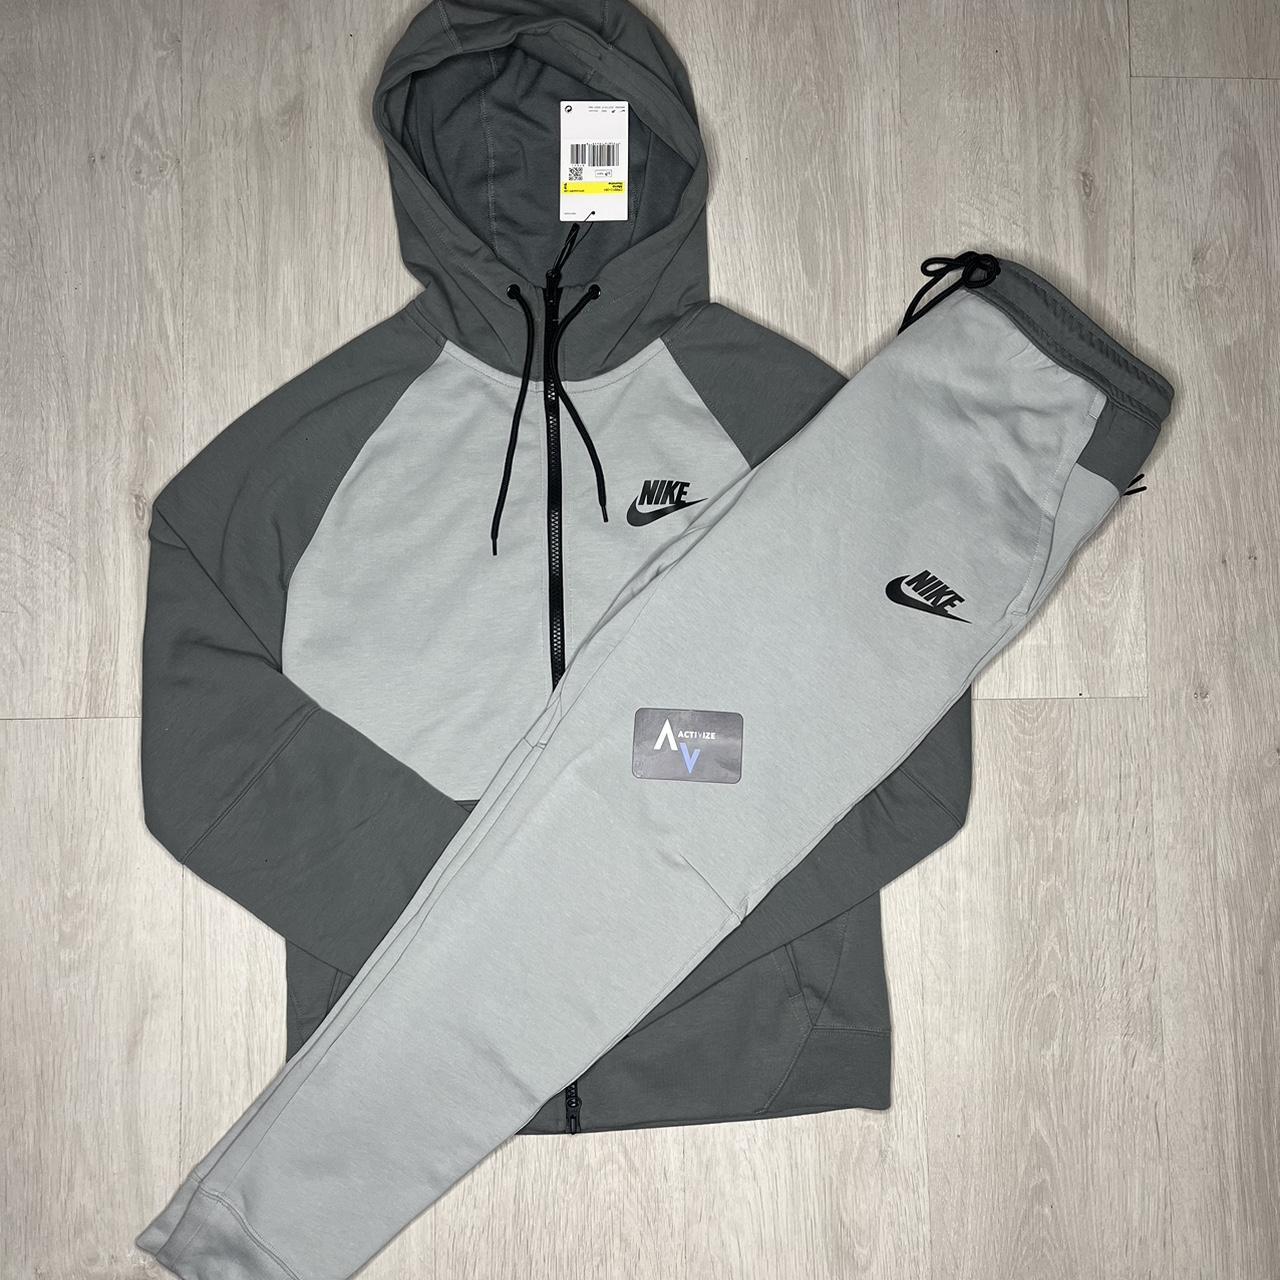 Nike Men's Grey and White Joggers-tracksuits | Depop